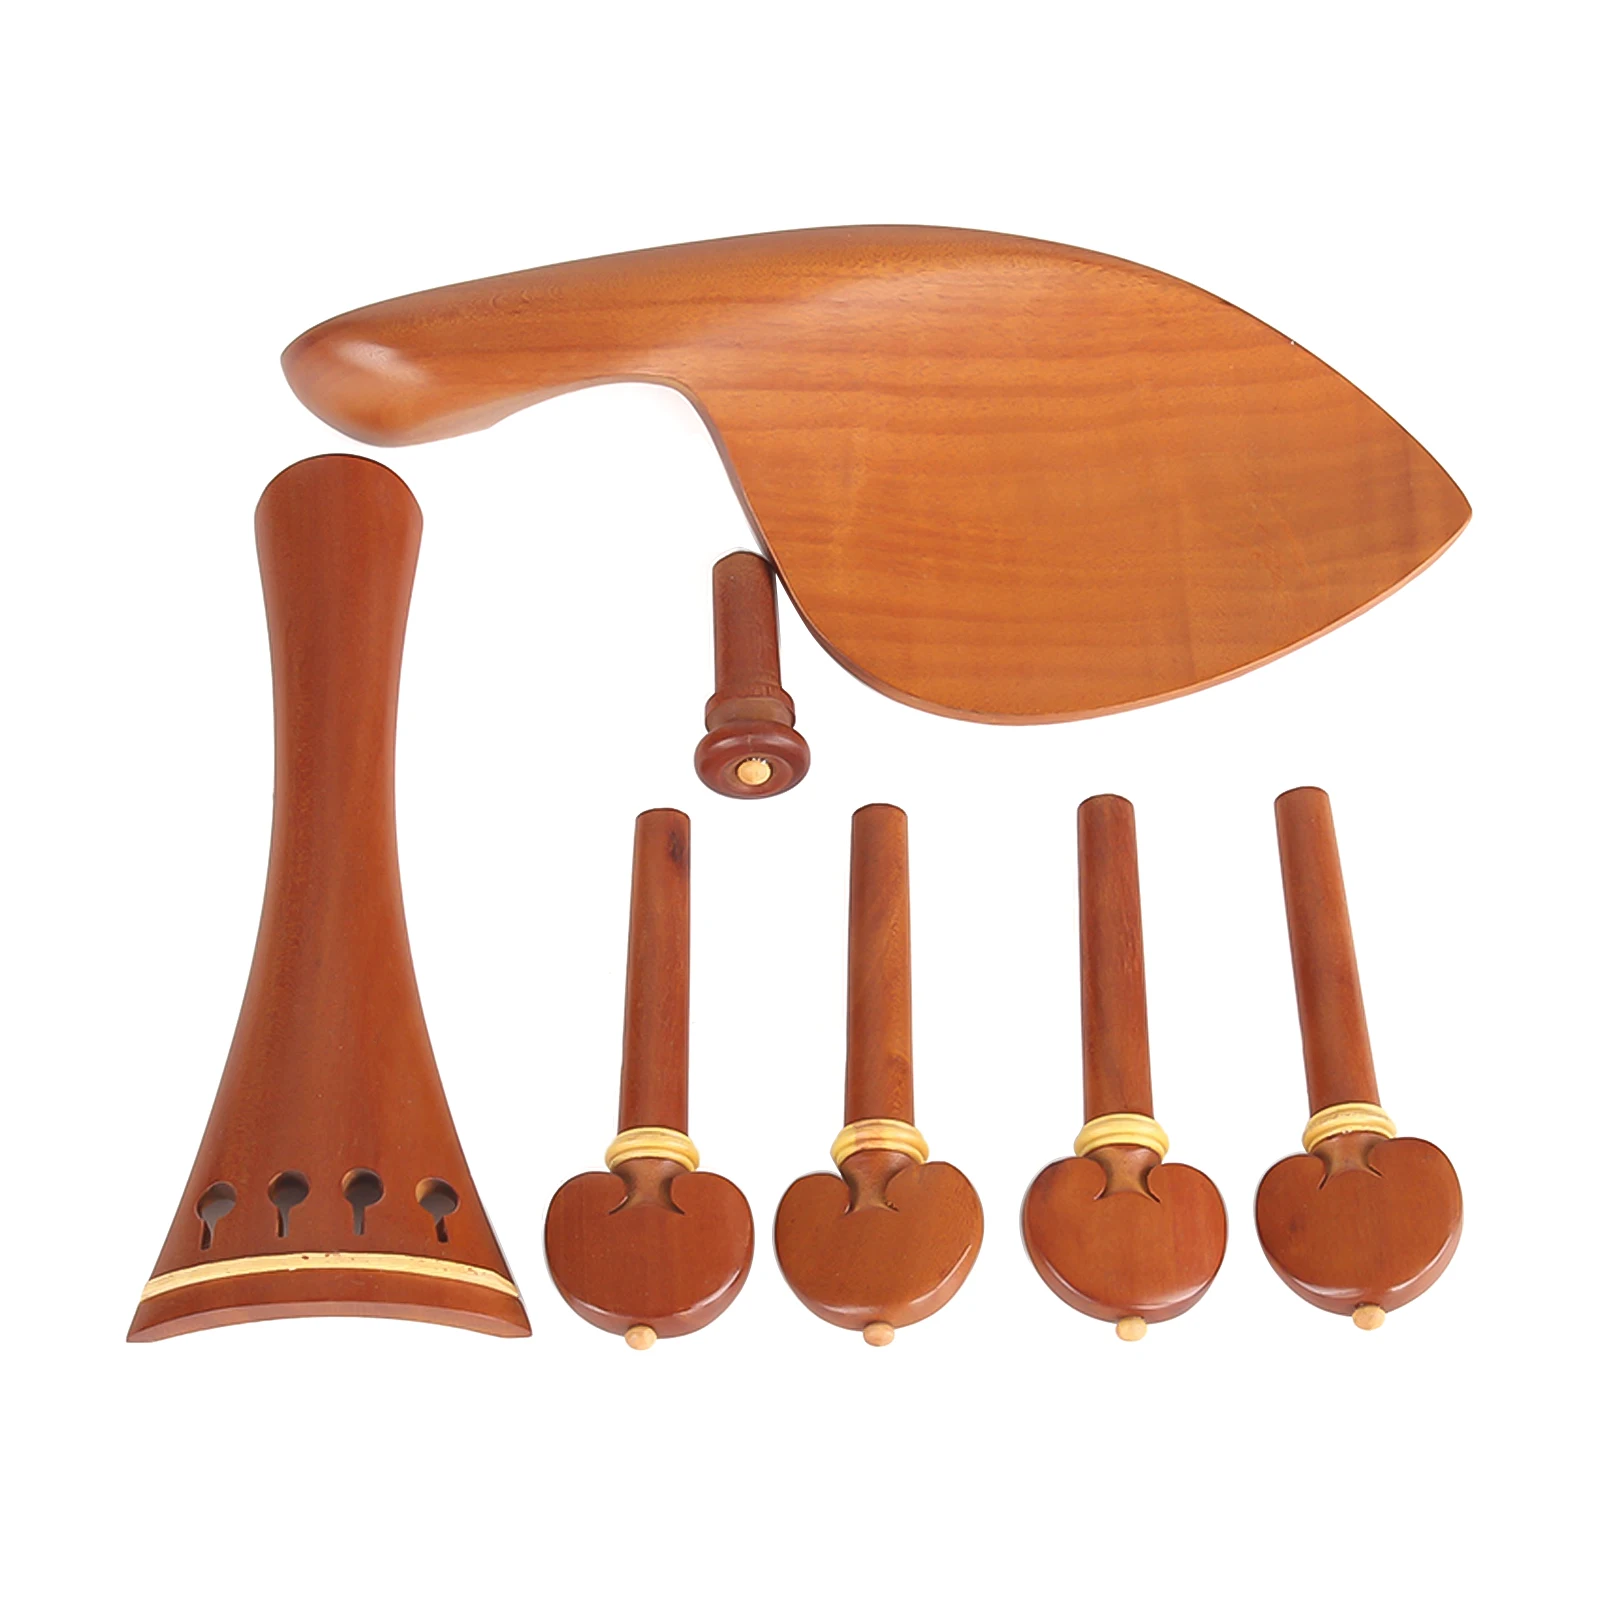 

7-Piece Jujube Wood Violin Parts Set Includes 1 Tailpiece 1 Chin Rest 1 Endpin 4 Tuning Pegs Accessories for 4/4 Violin